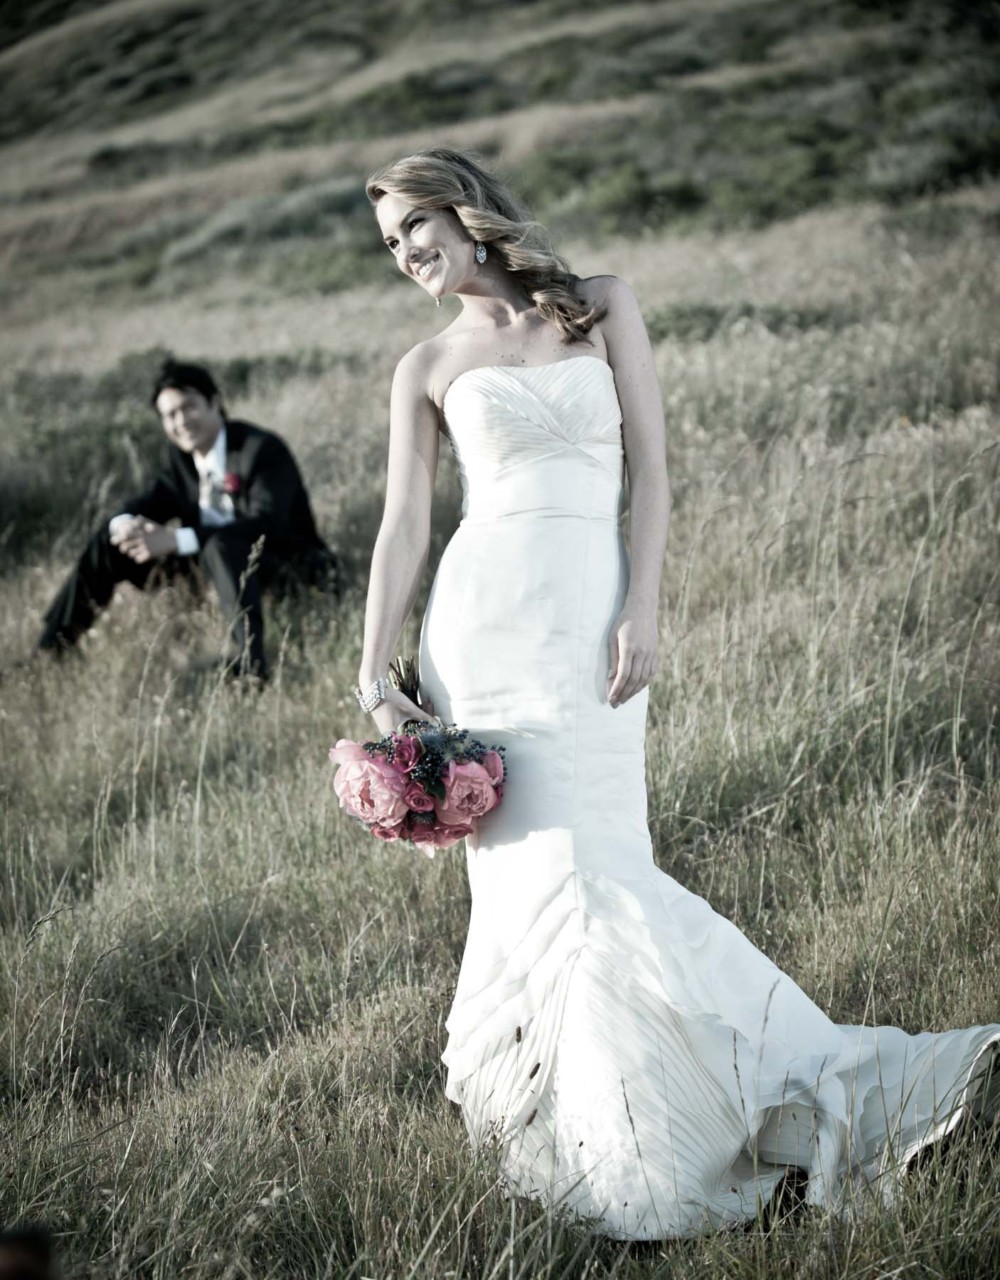 Looking for a top-rated wedding photographer in Eagle River?